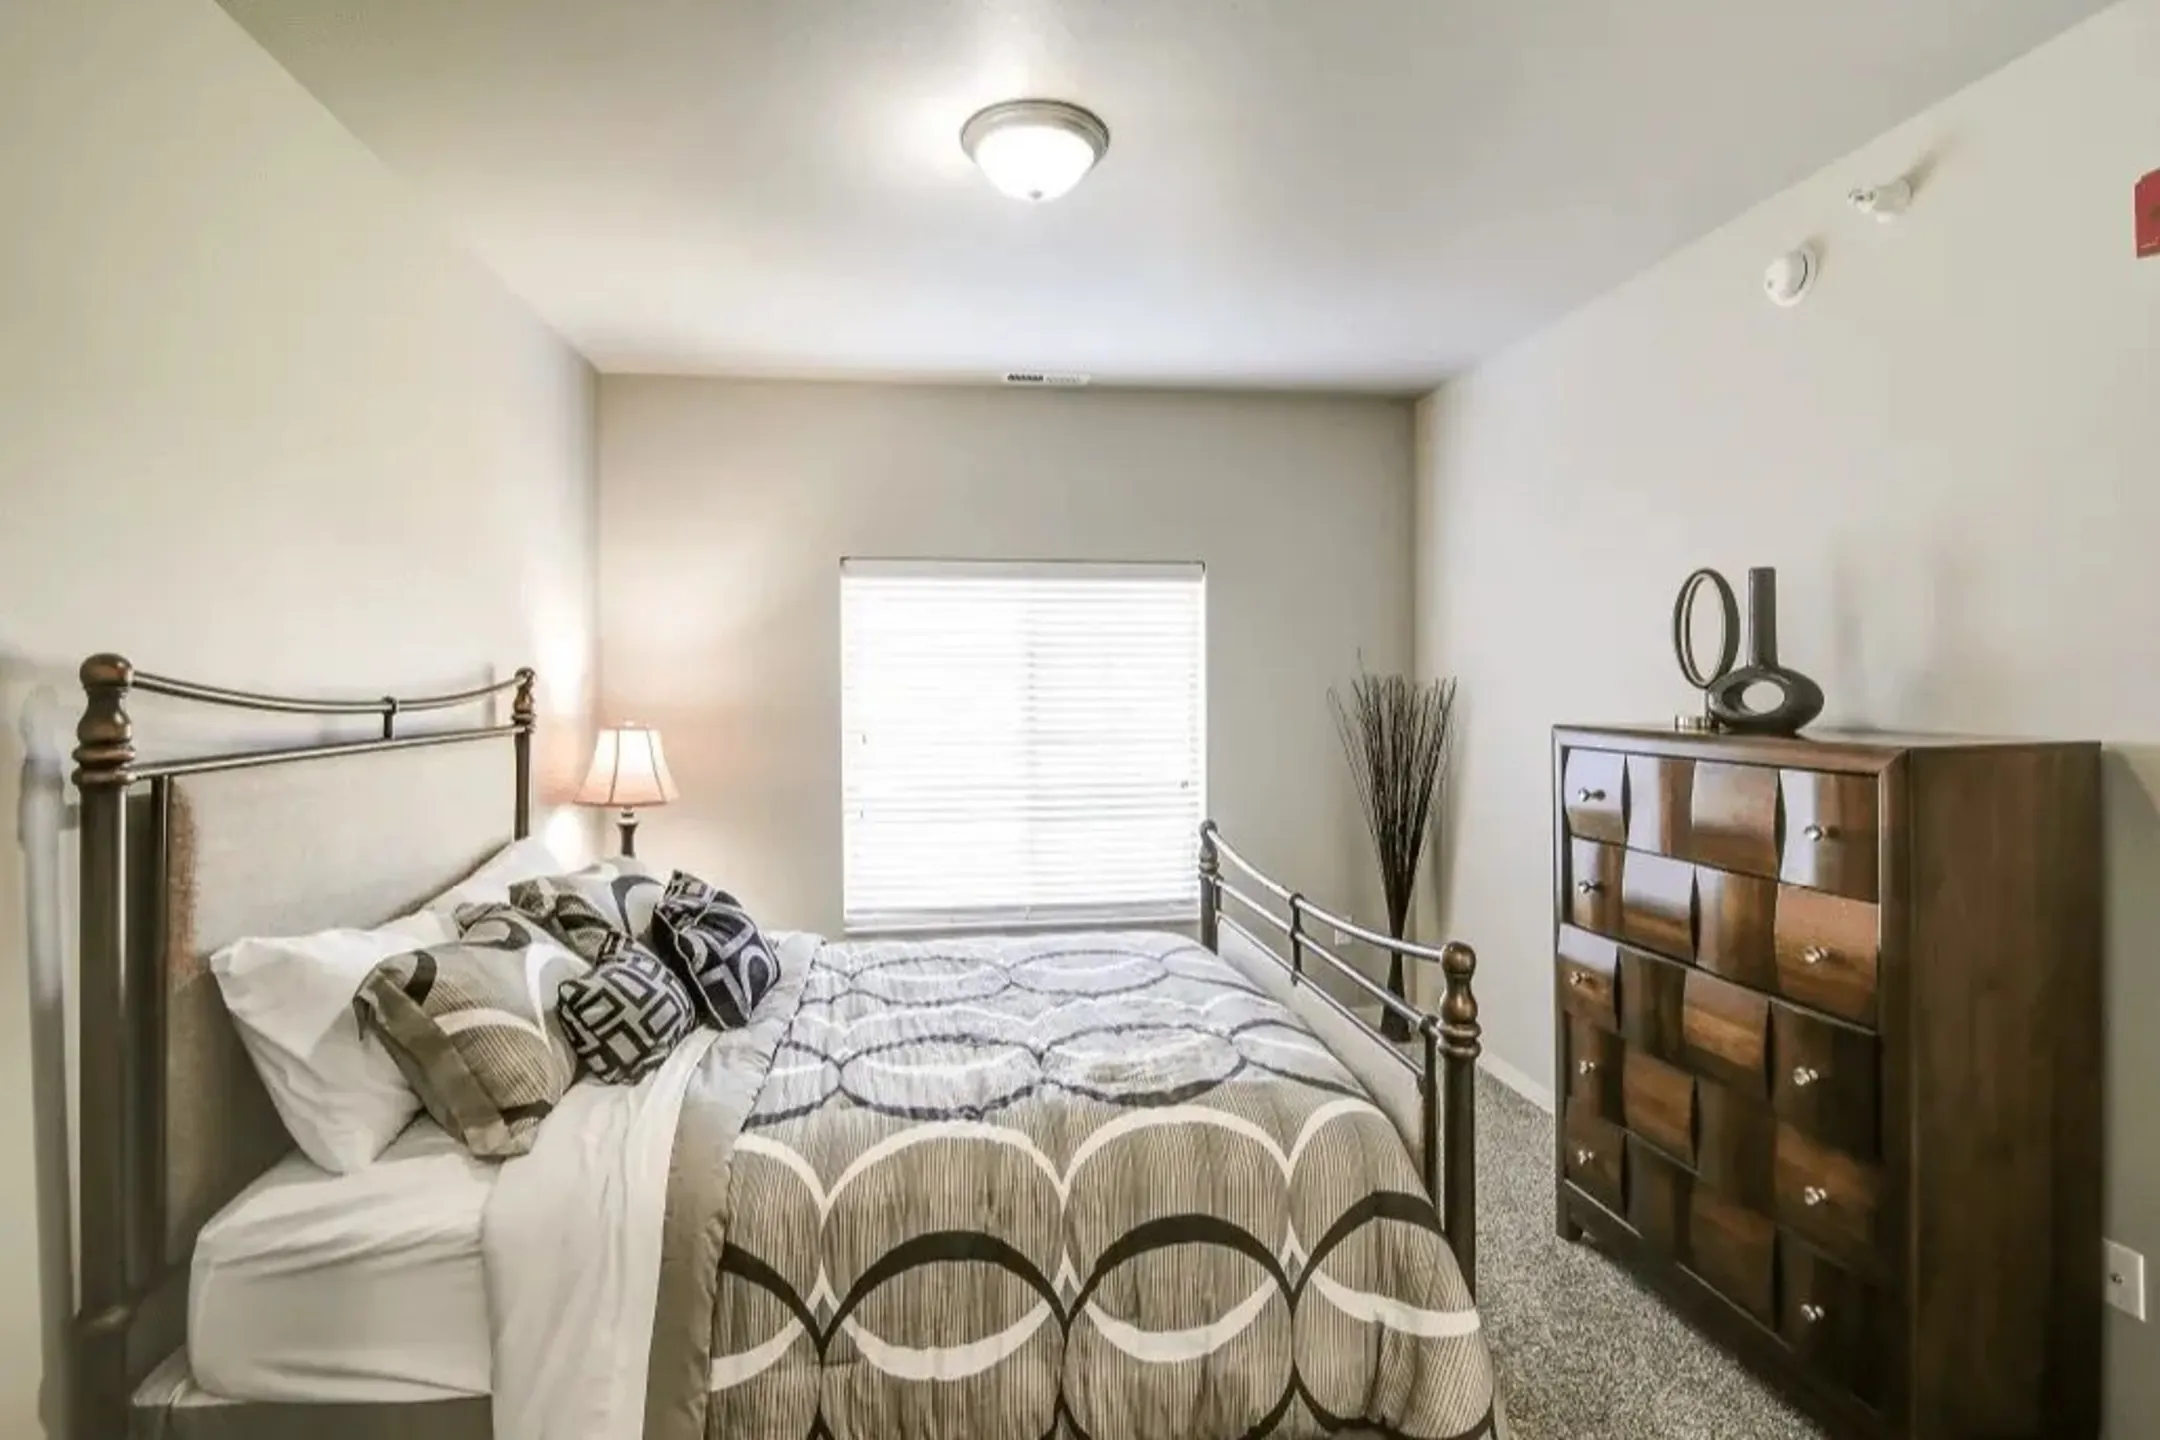 Bedroom - North Highlands Luxury Apartments - Minot, ND